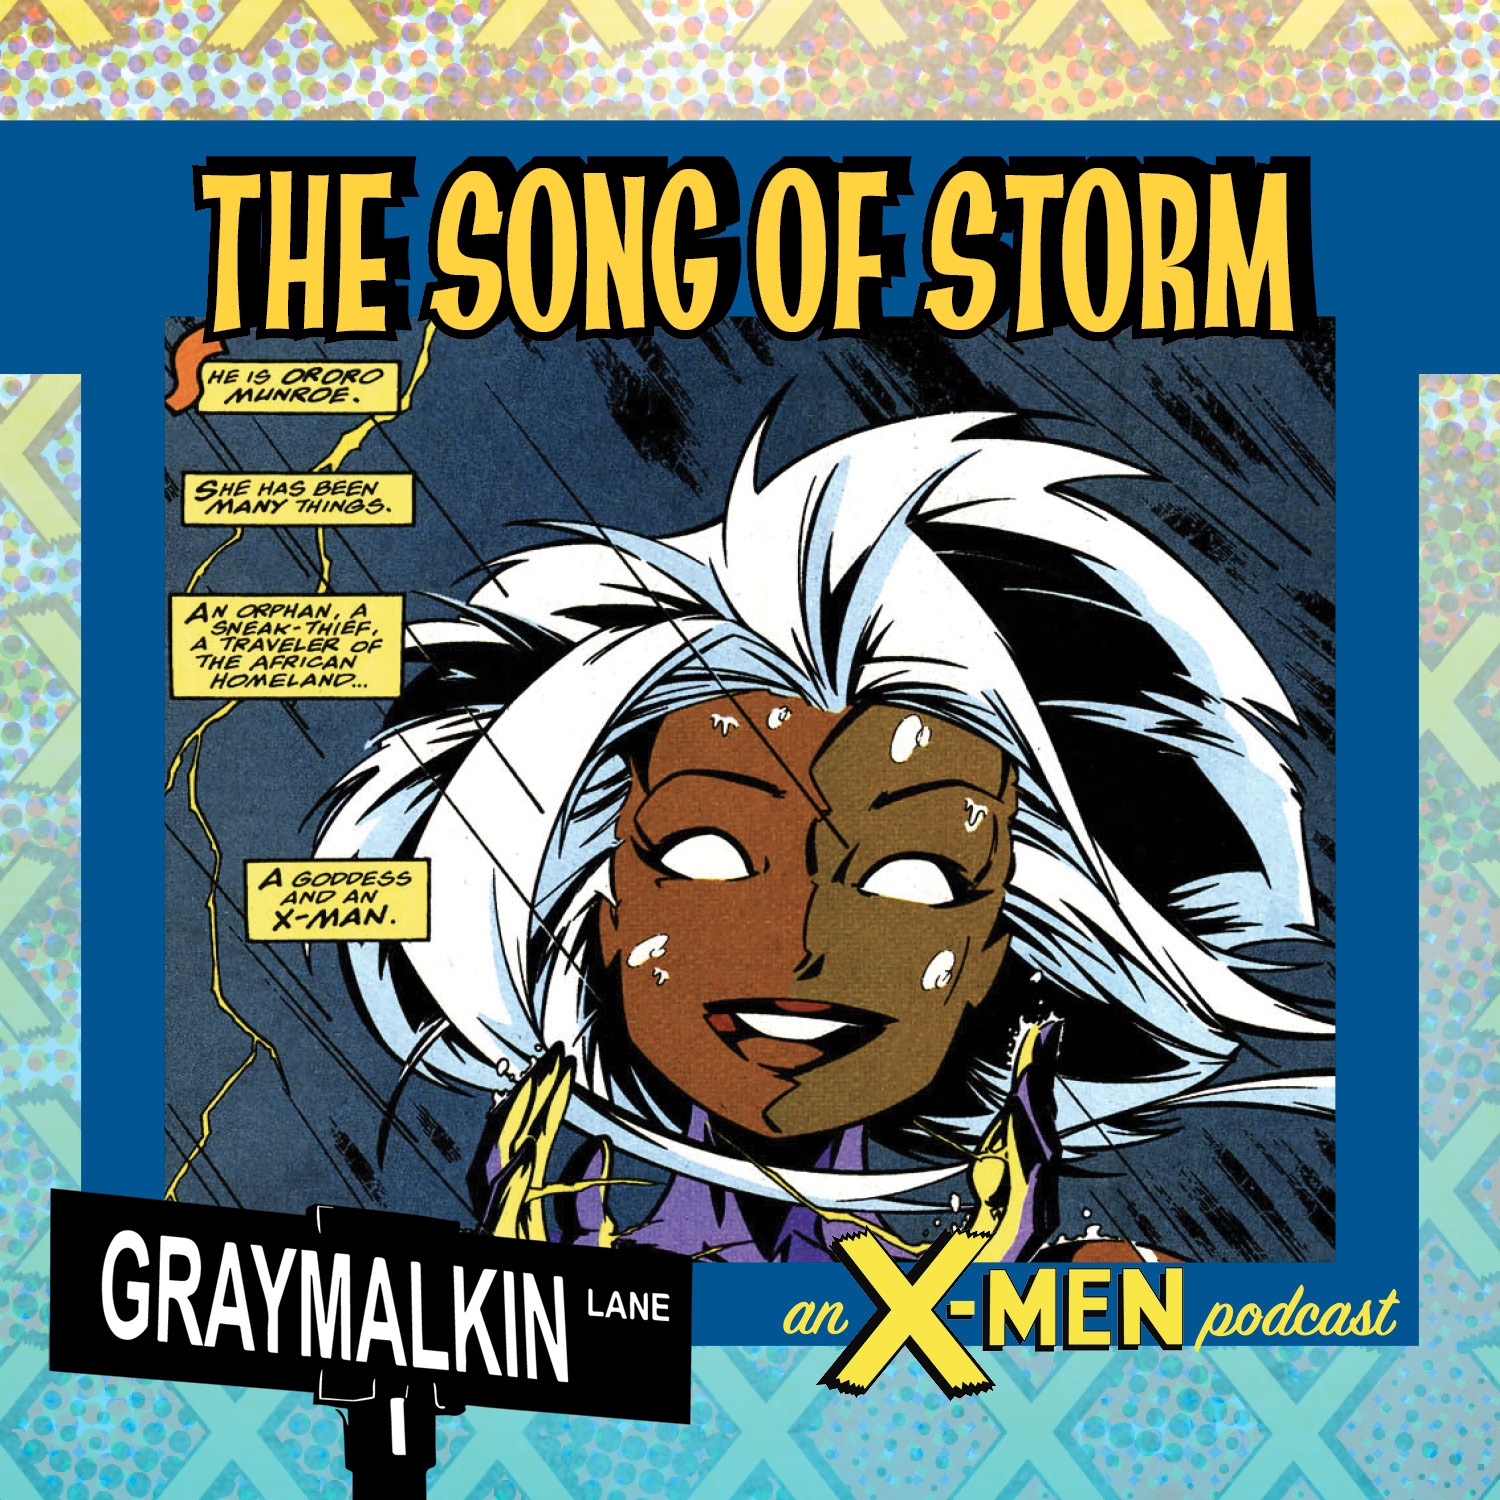 Uncanny Origins 9: the Song of Storm! Featuring Annie Nocenti! With Carrie Harris and Barr Foxx!